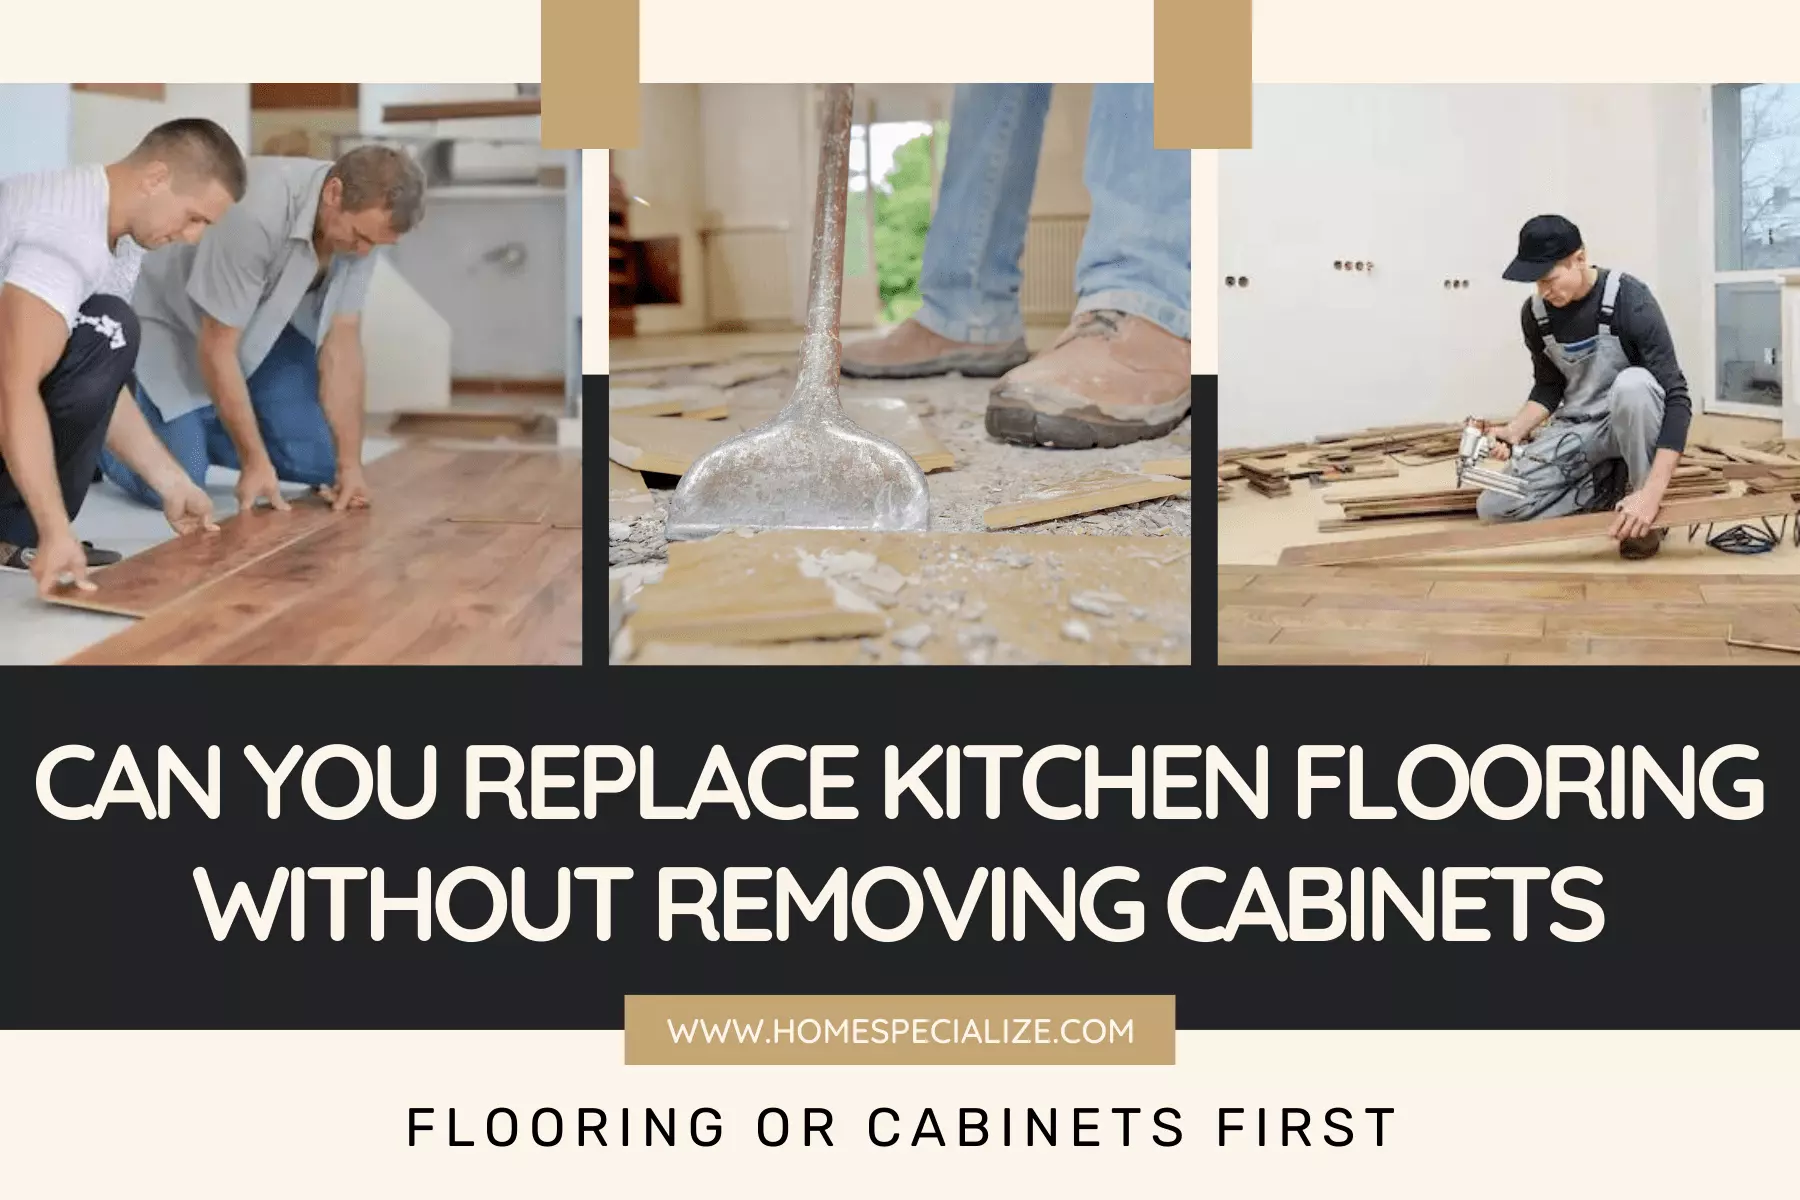 Can You Replace Kitchen Flooring Without Removing Cabinets